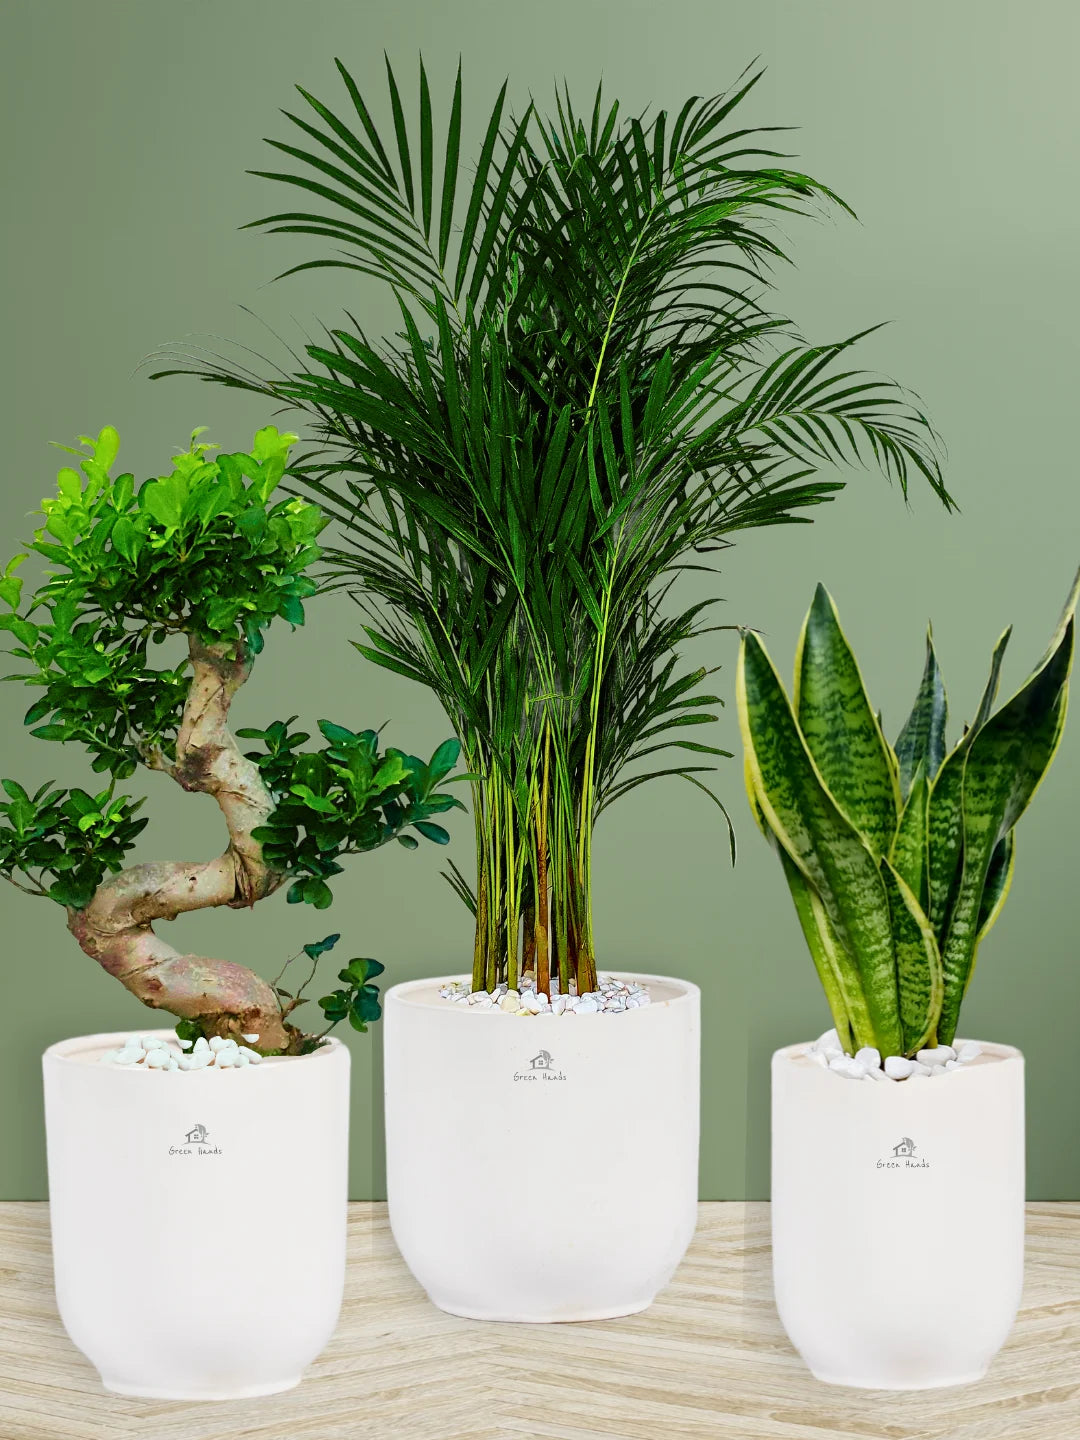 Three Plants Bundle: Potted Areca Palm, Snake Plant, and S Bonsai Tree - A Complete Indoor Garden Solution